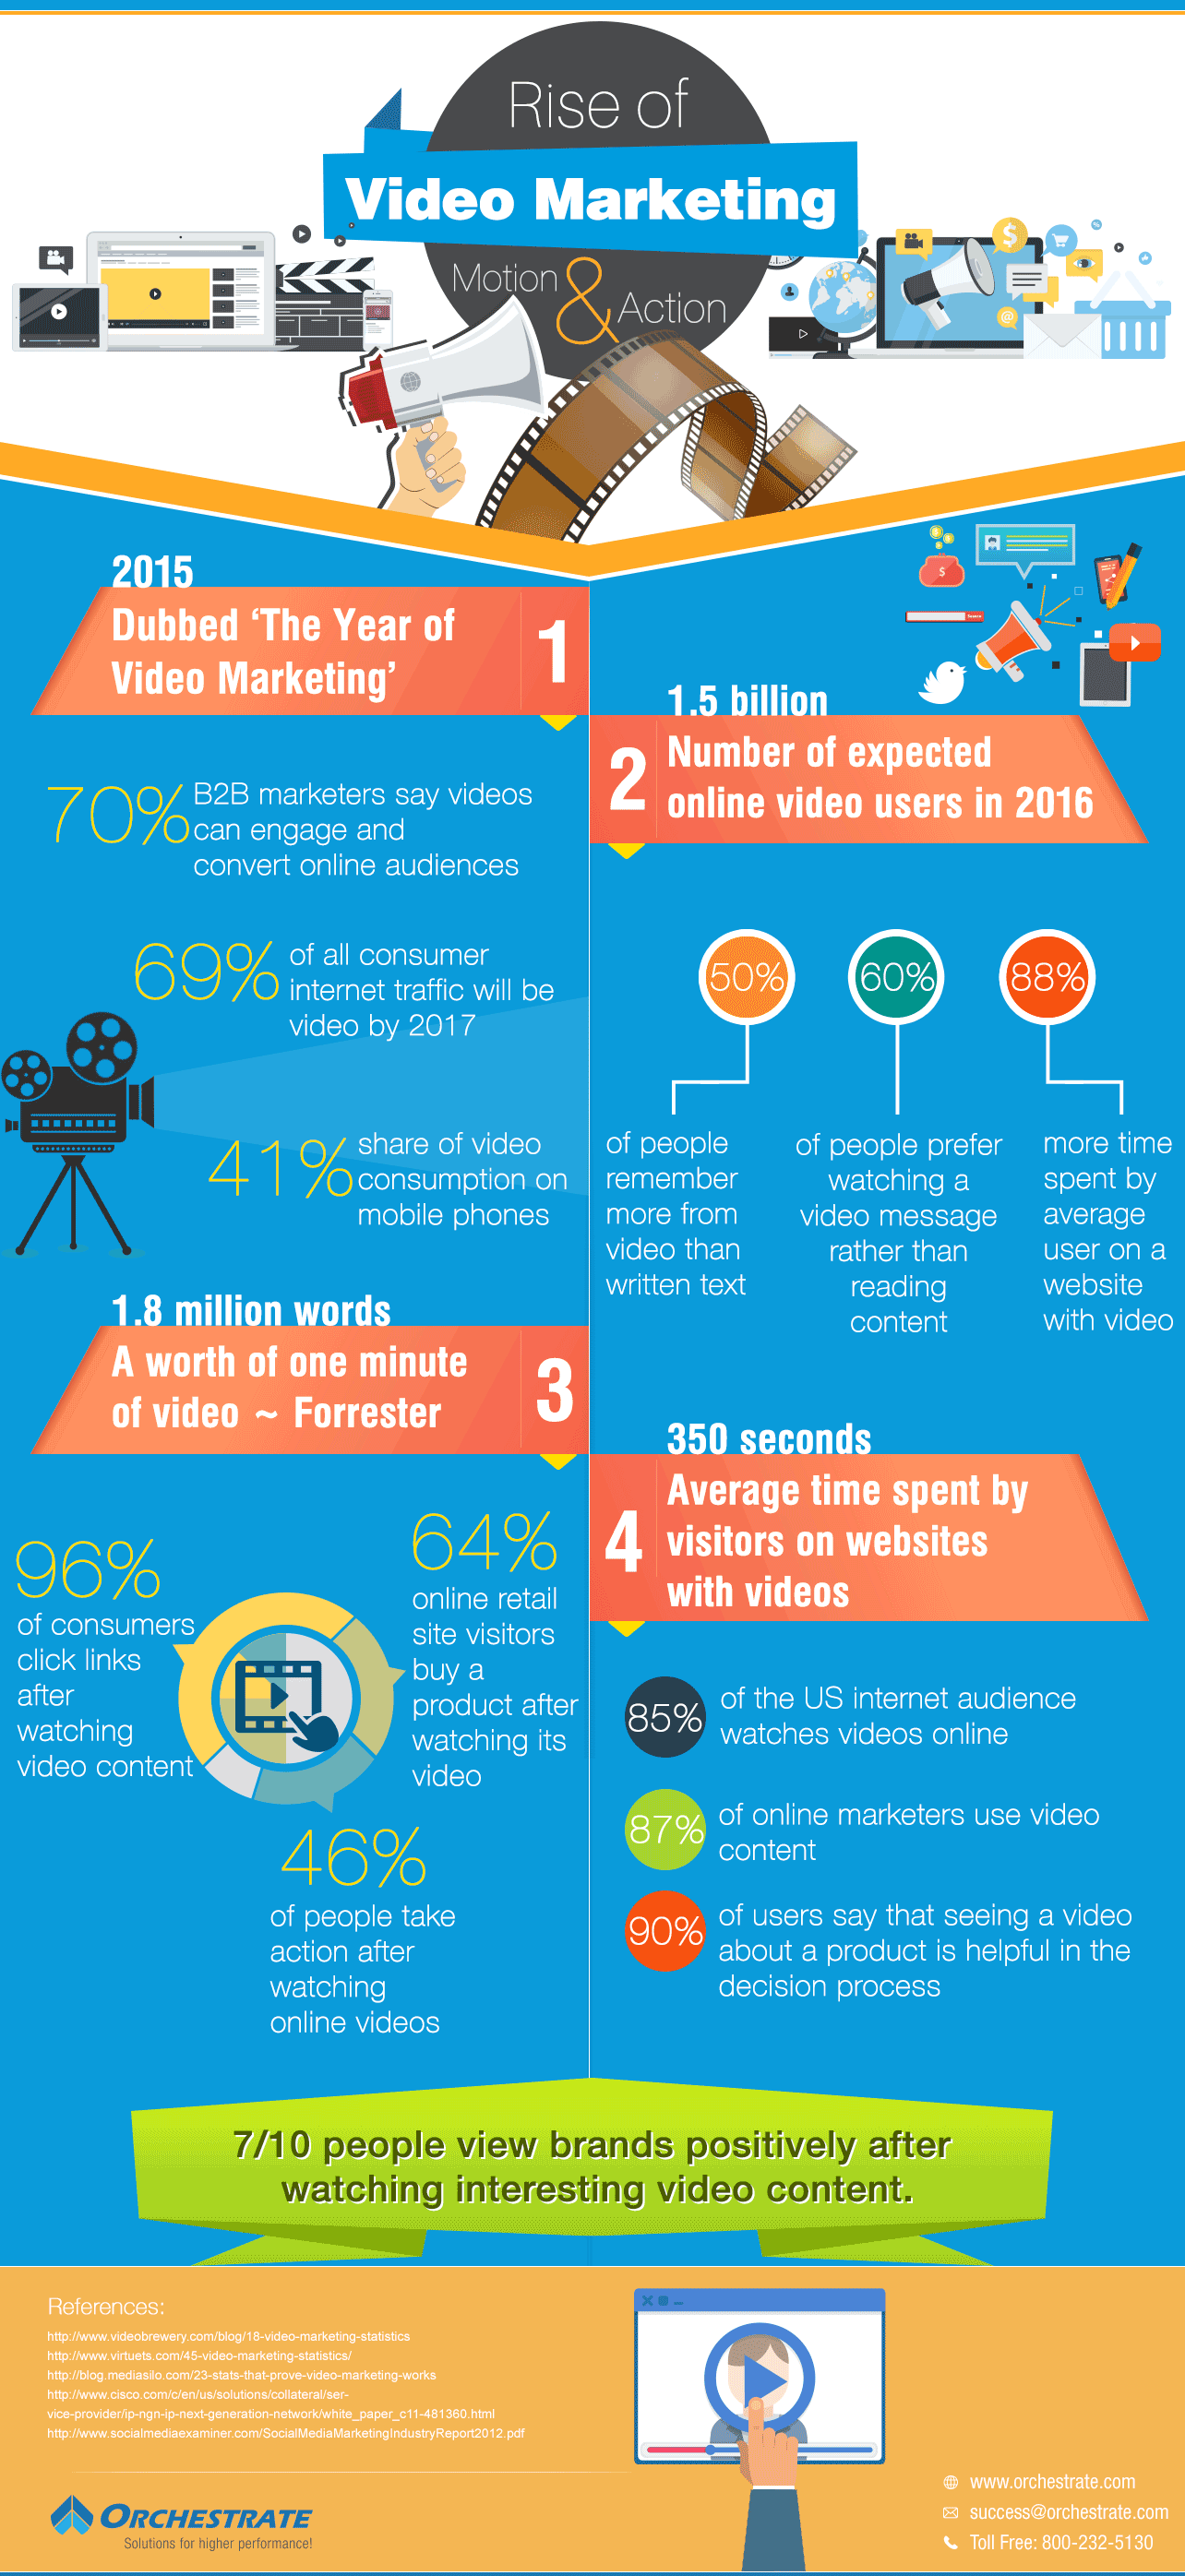 the-rise-of-video-marketing-in-2015-infographic